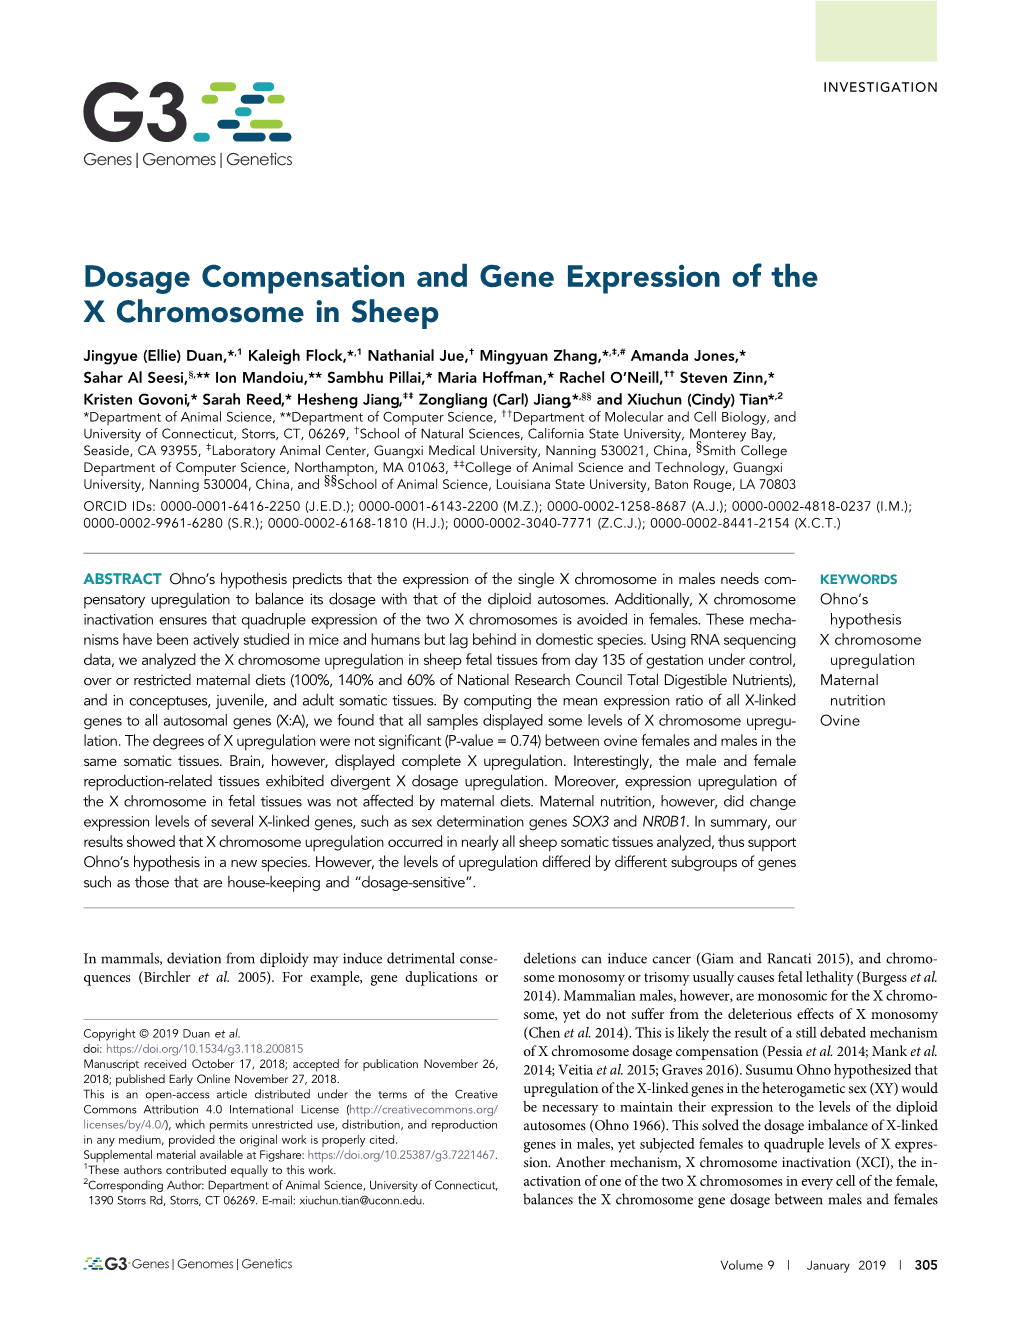 Dosage Compensation and Gene Expression of the X Chromosome in Sheep